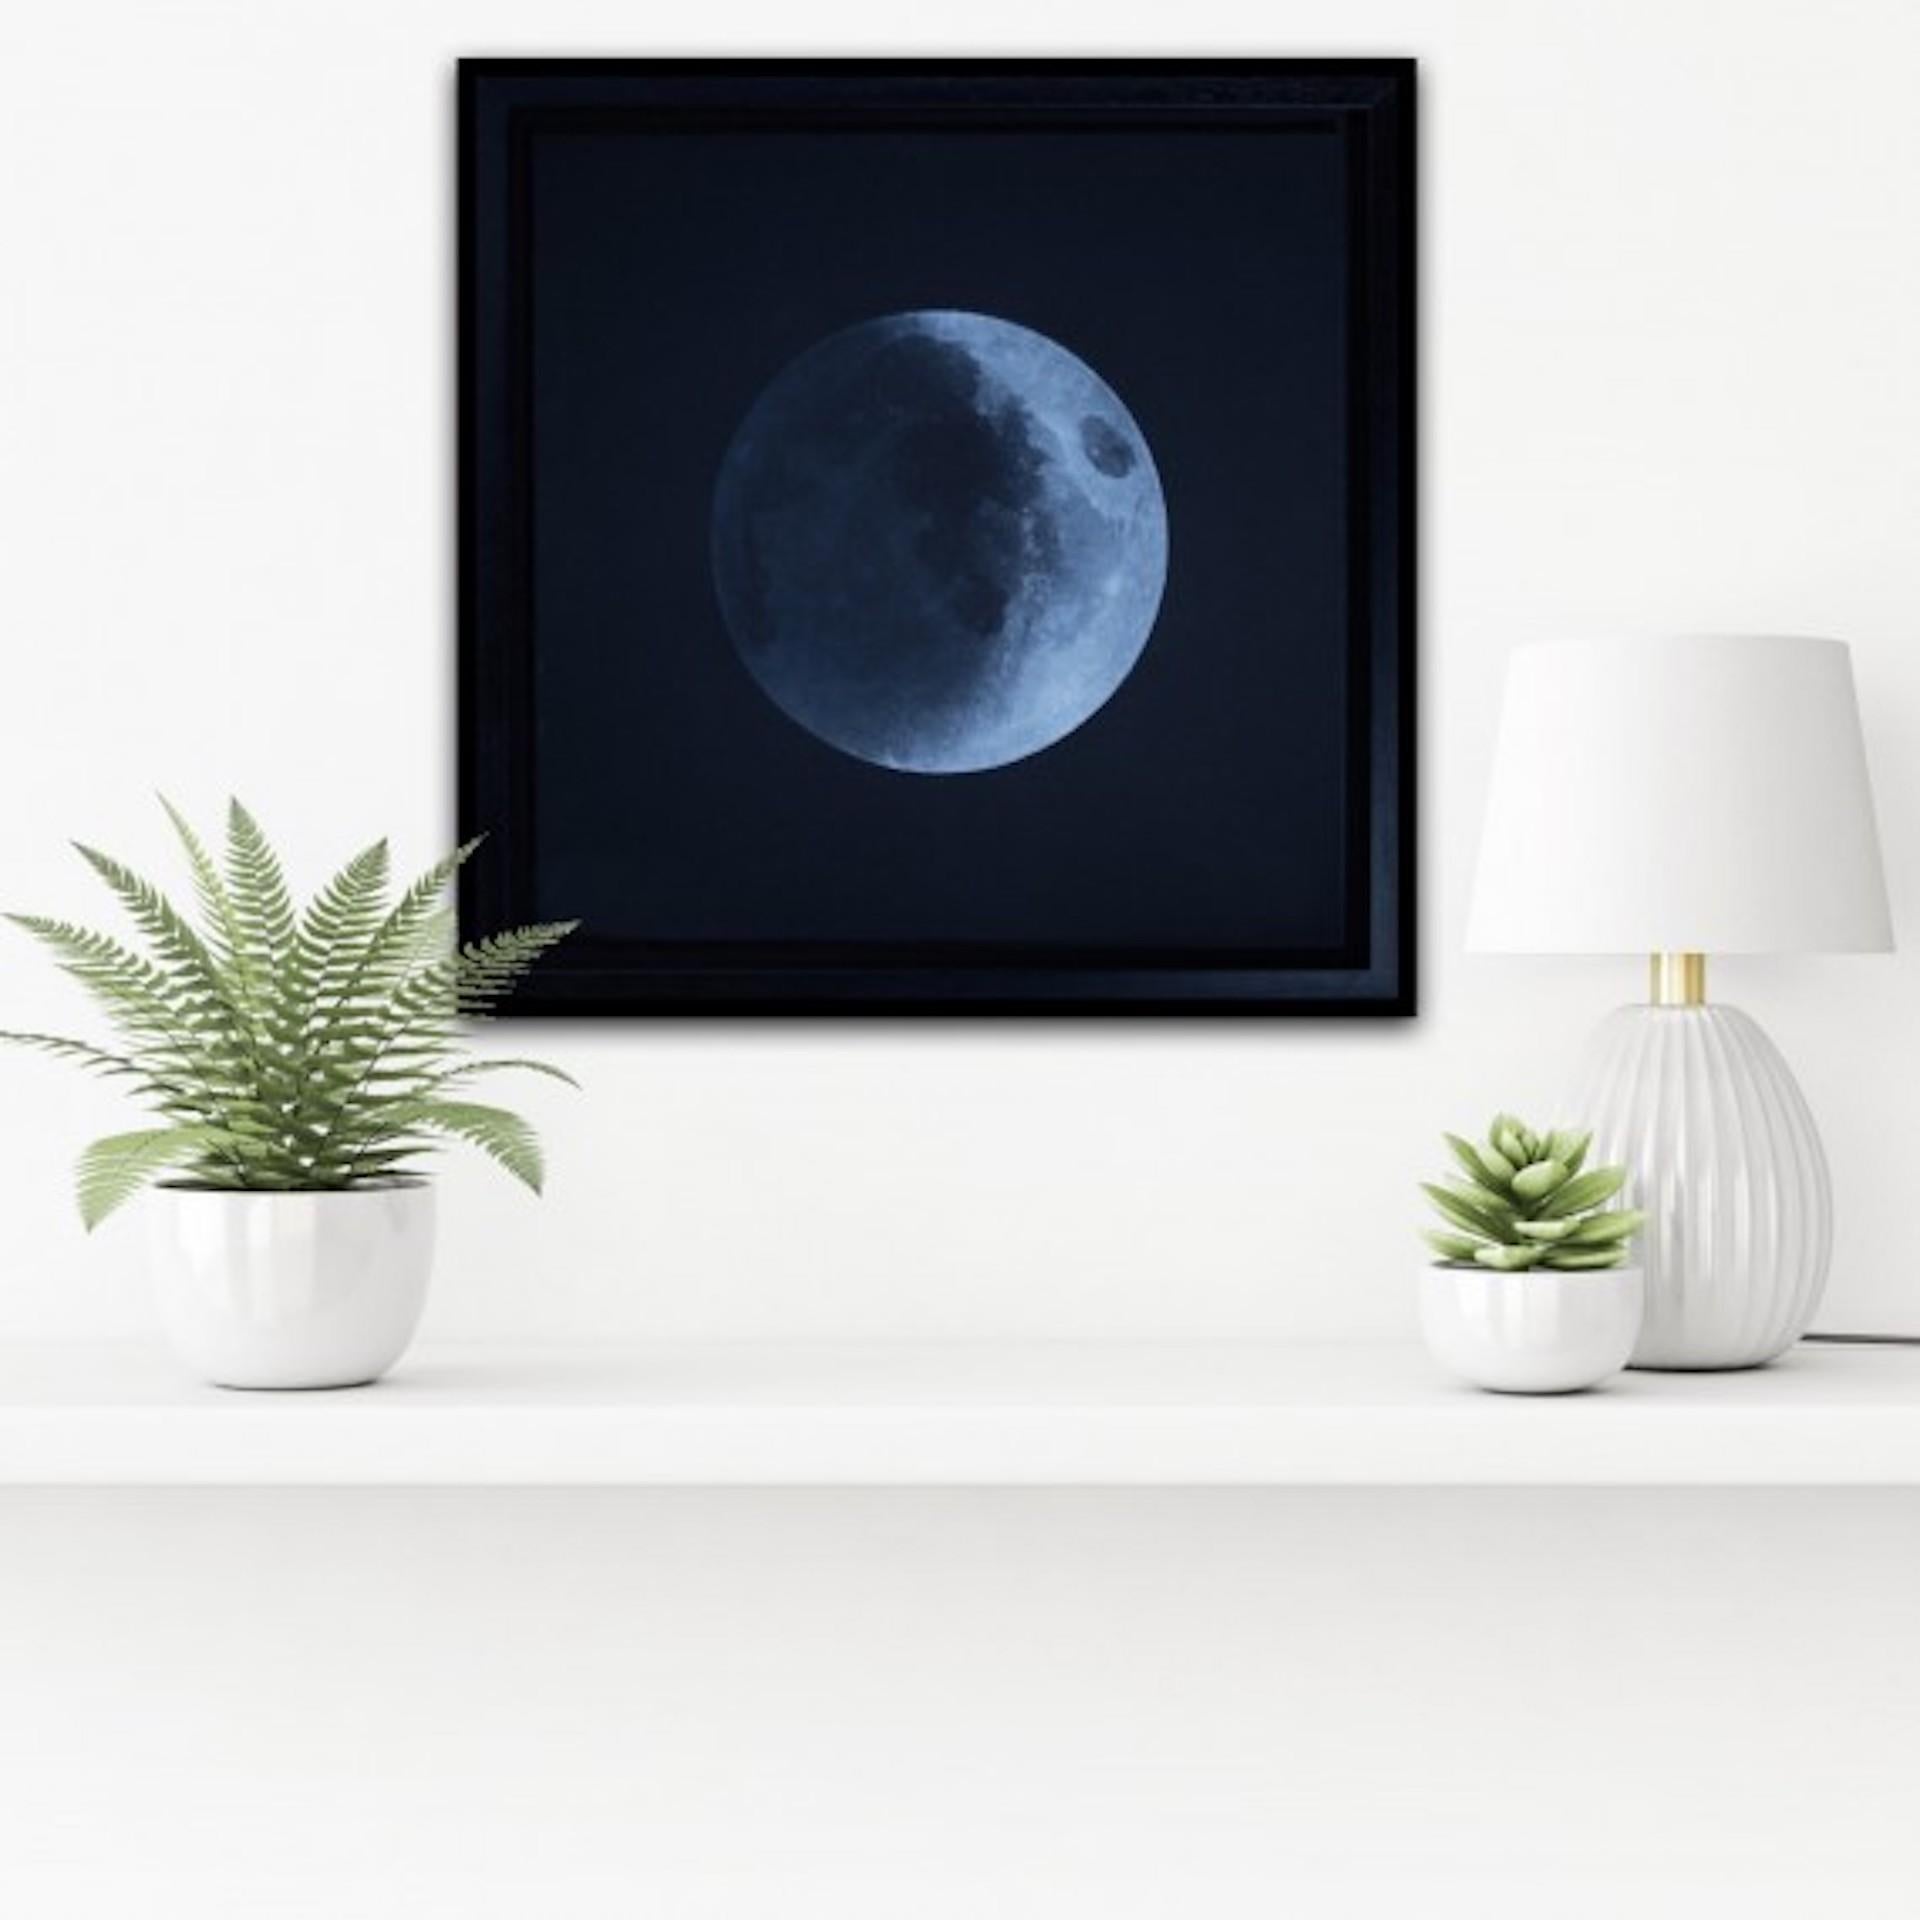 Waxing Crescent Young (The Moon Series) by Guy Allen [2020]
limited_edition

Etching on paper

Edition number 75

Image size: H:51 cm x W:51 cm

Complete Size of Unframed Work: H:51 cm x W:51 cm x D:0.1cm

Sold Unframed

Please note that insitu